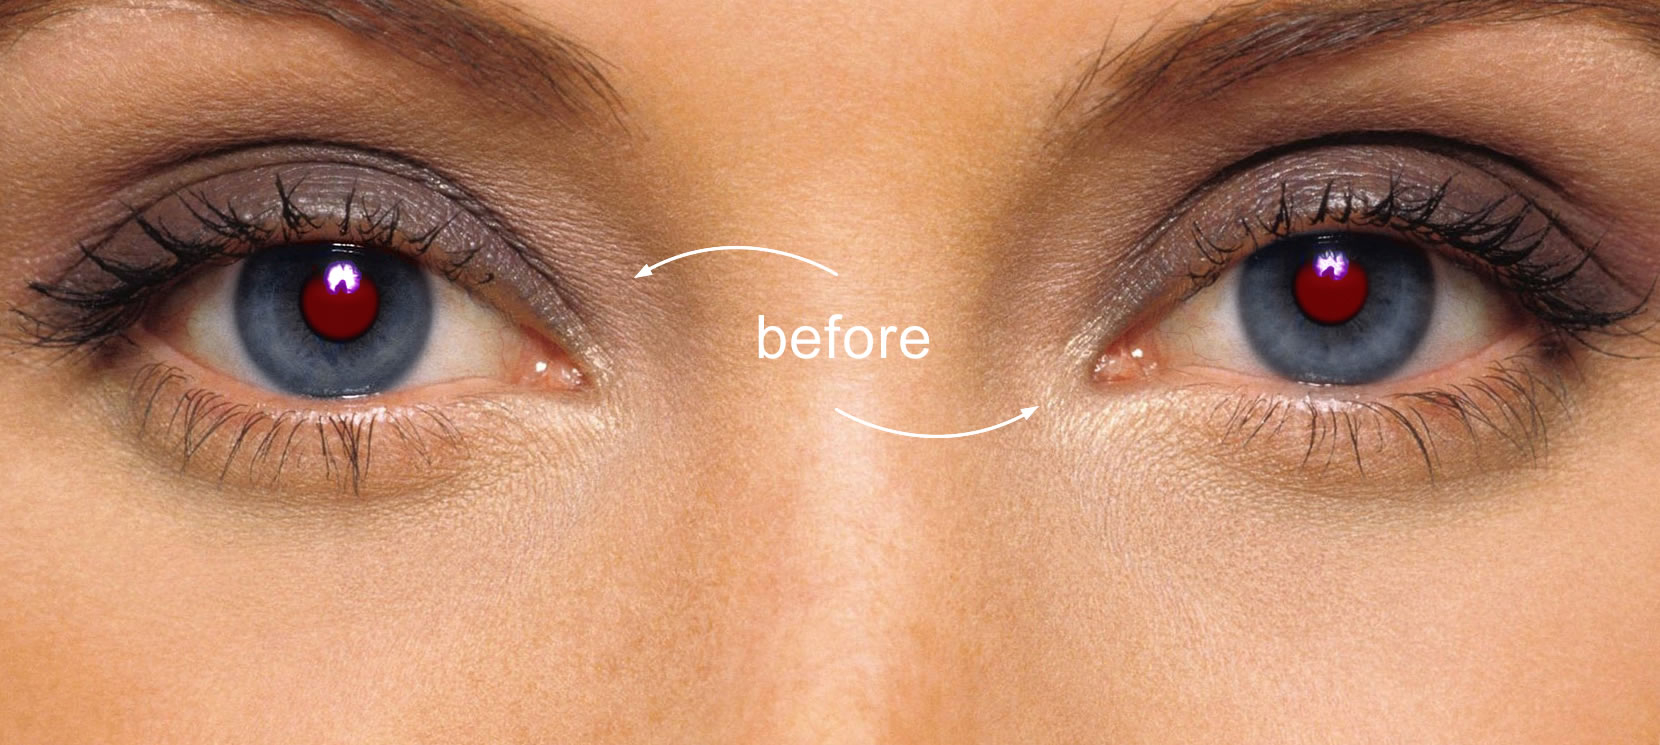 Red Eye Makeup Remove Red Eye In A Photo Whiten Eyes And Make Them Sharp